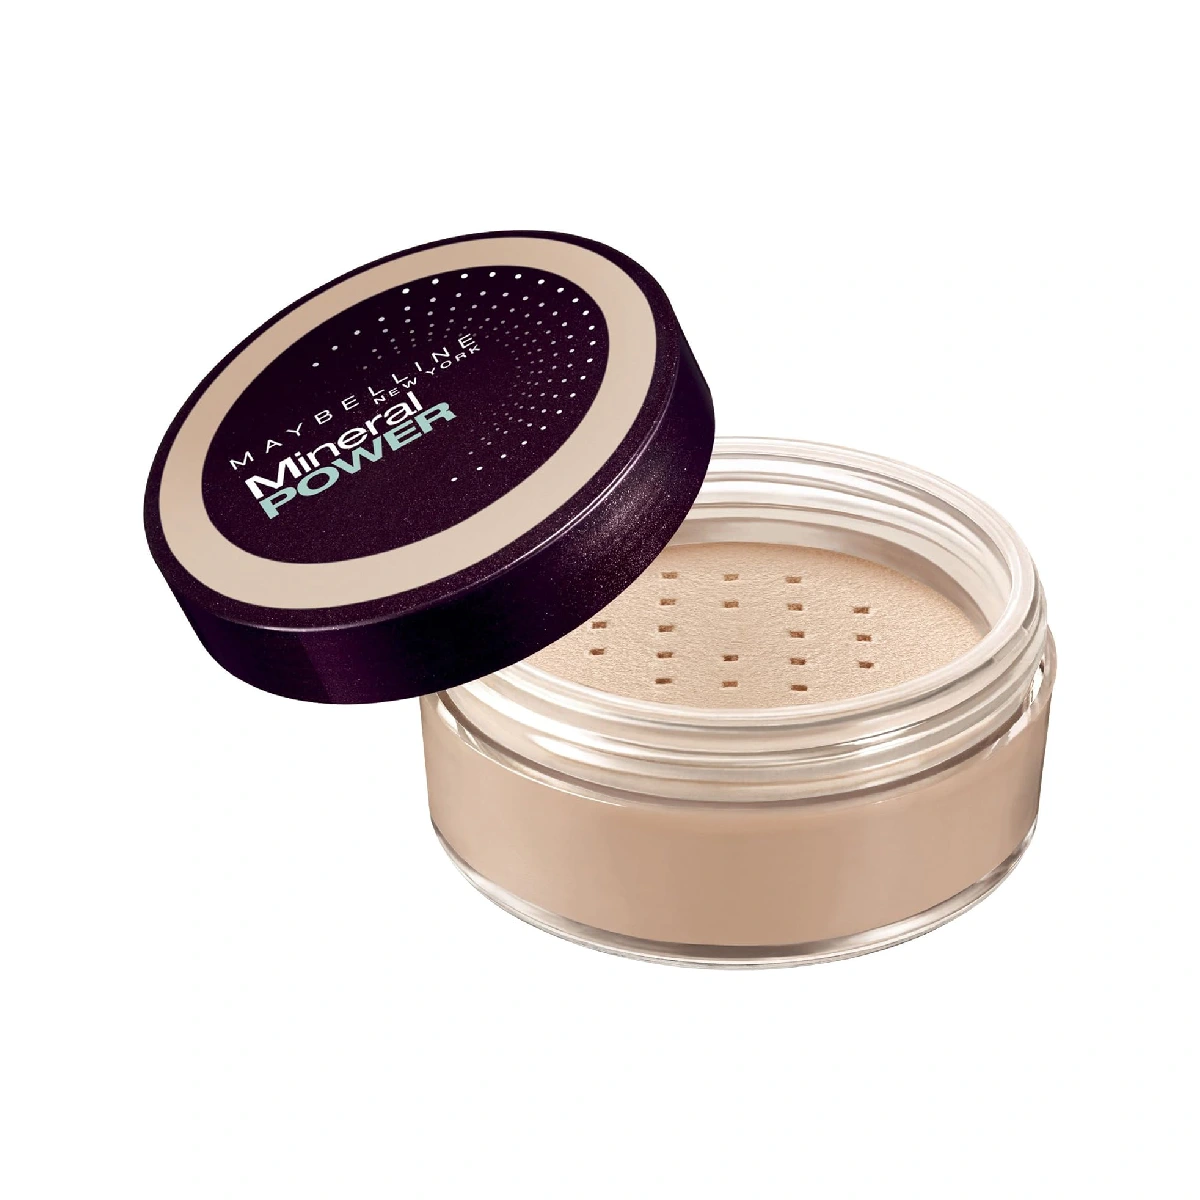 Maybelline Mineral Power Powder Foundation - compact powder case against a white background.